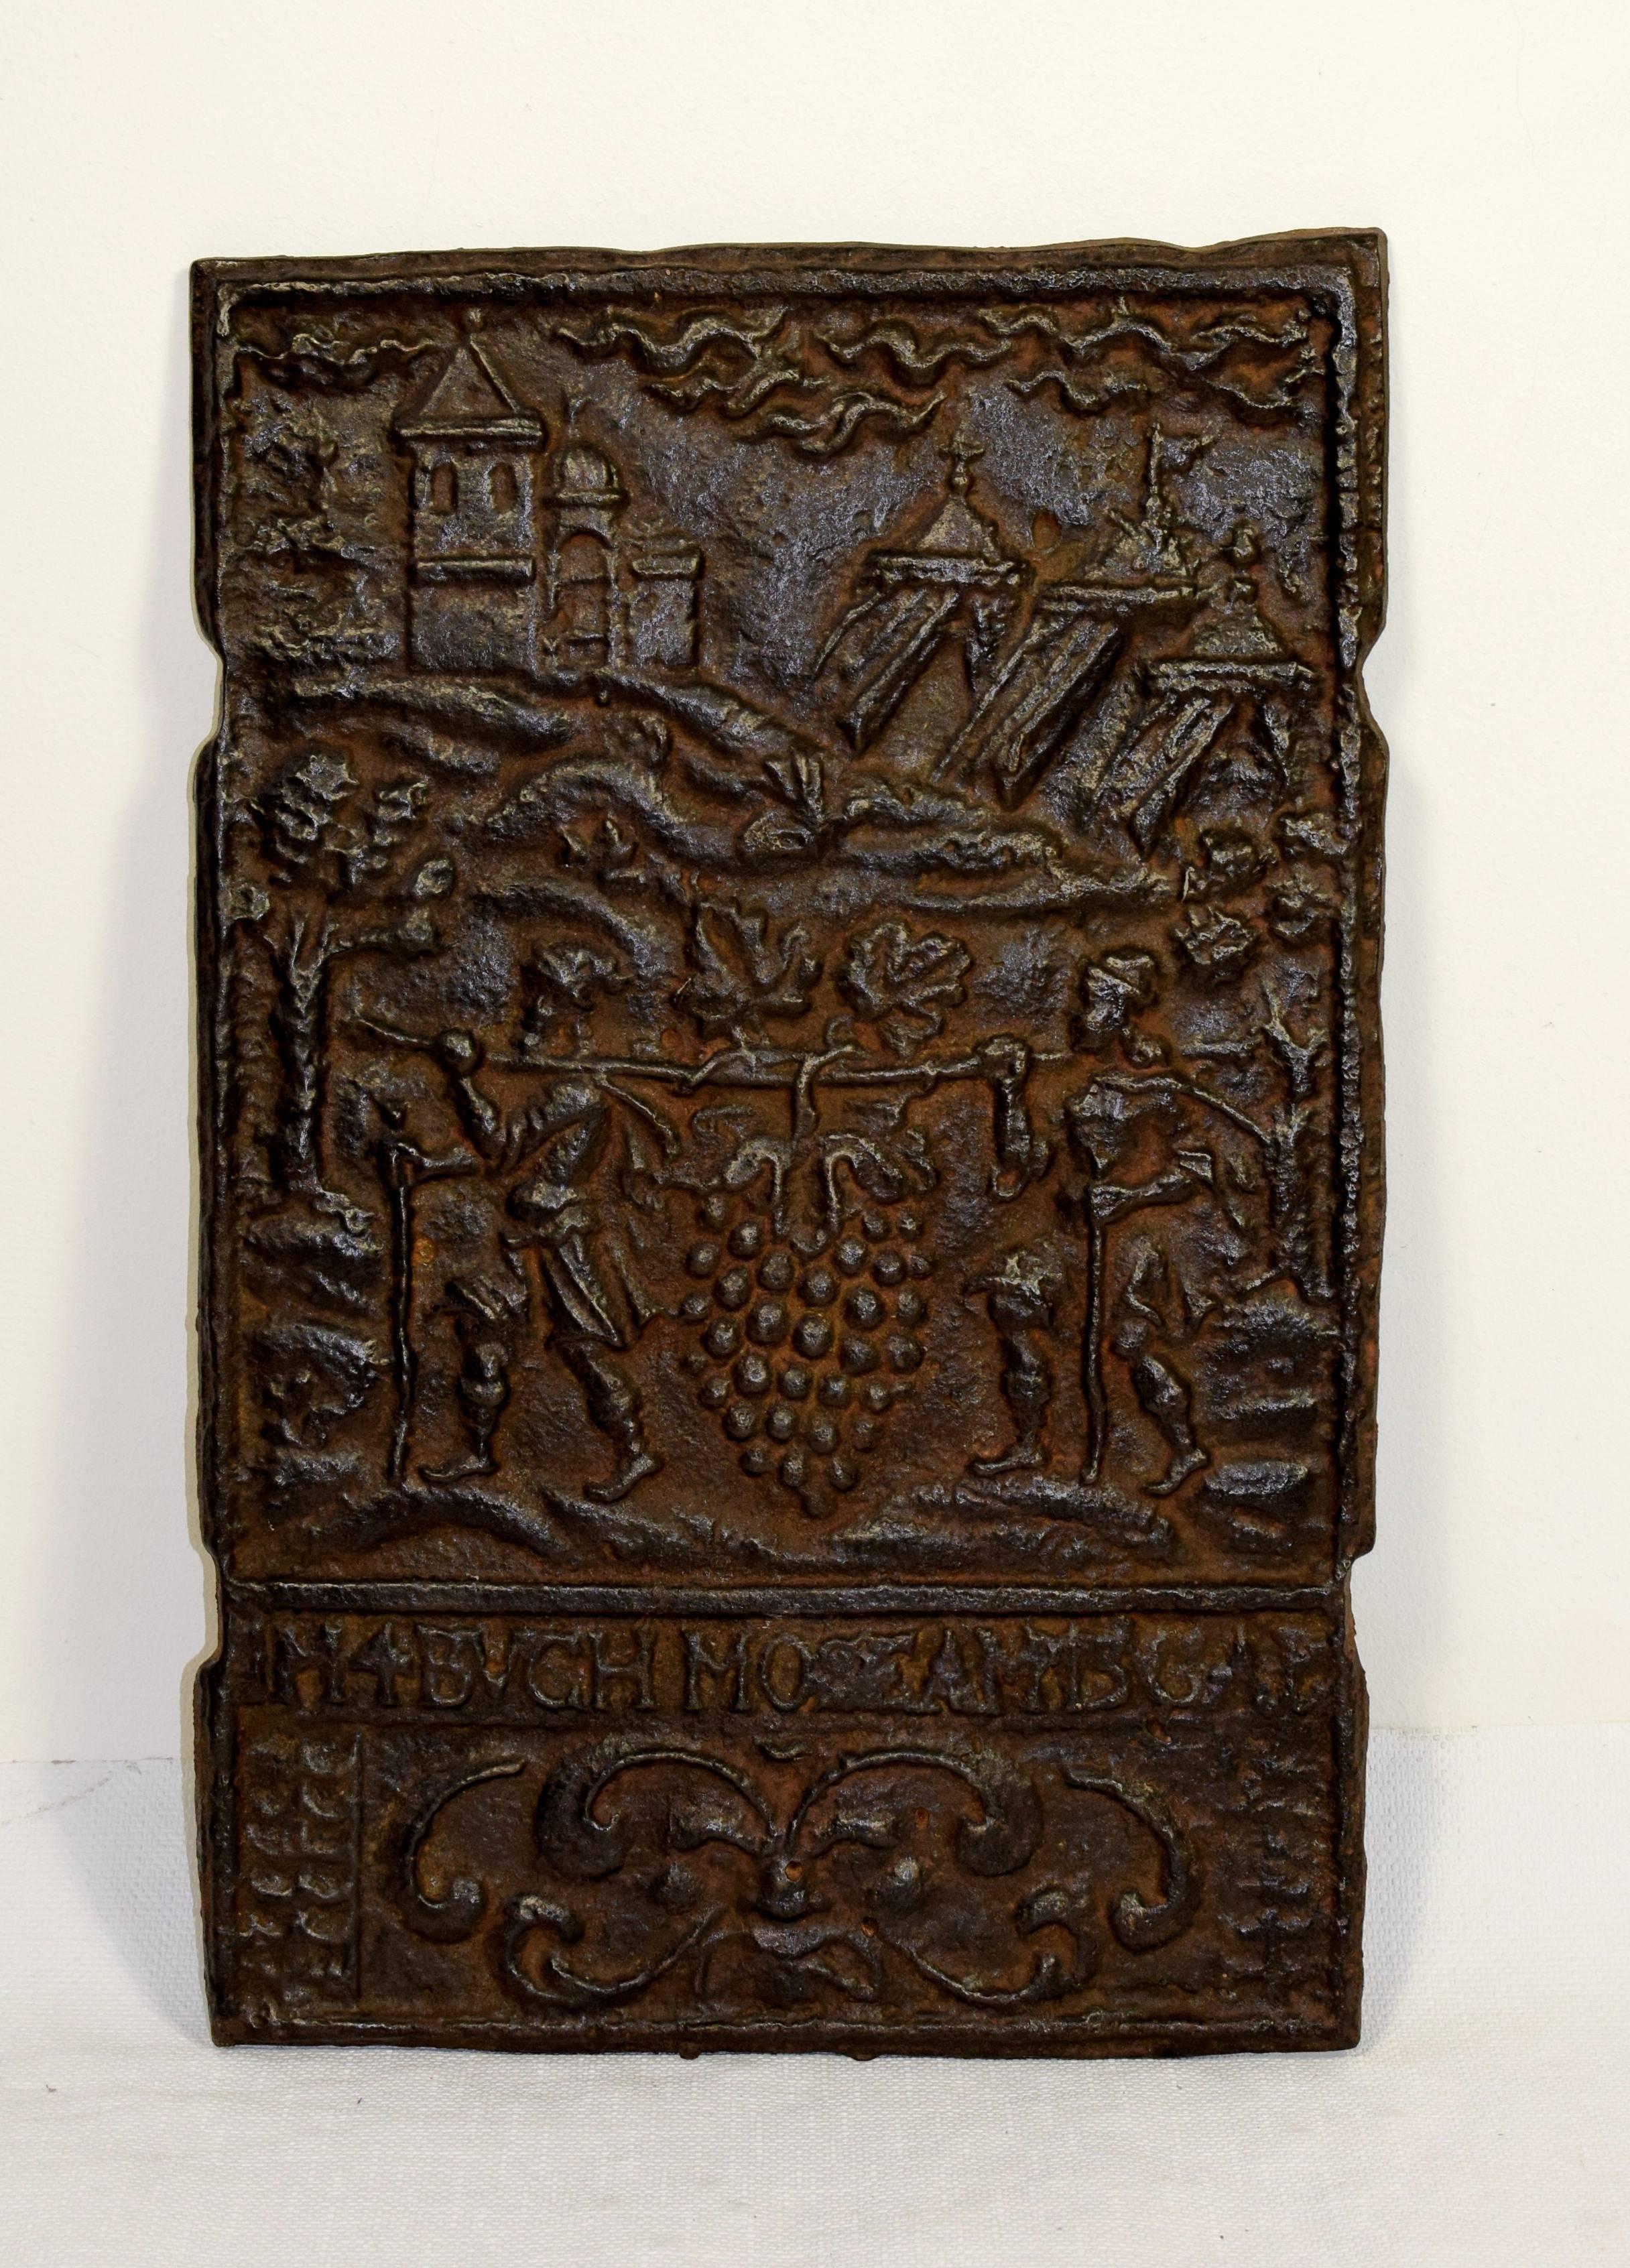 Very early (end of 17th or beginn of 18th century) German front fireback with bible motive: the scouts in the land of the promise (Kanaan).
Furnaces with these motifs are very rare and were manufactured by the Alt Leiningen Eisenhütten (Iron